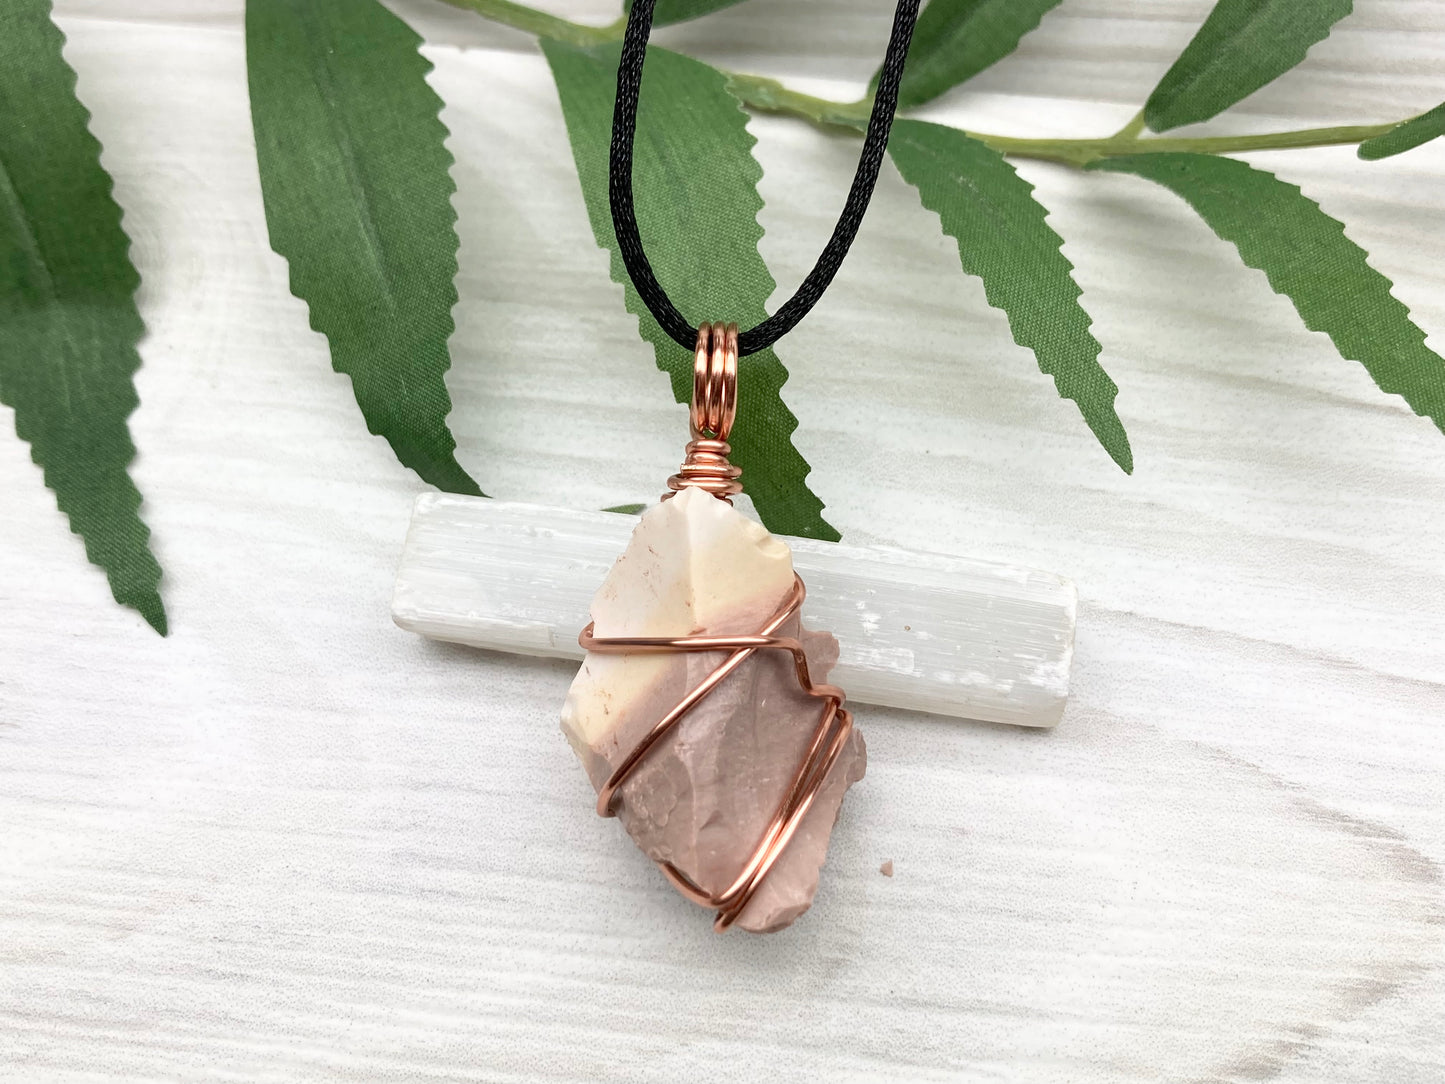 Raw Mookaite Jasper Necklace. Cream and Light Brown Crystal Wrapped With Tarnish Resistant Copper Wire. Comes On A Black Satin Silk Chain. Handcrafted During The Moon In Aries.